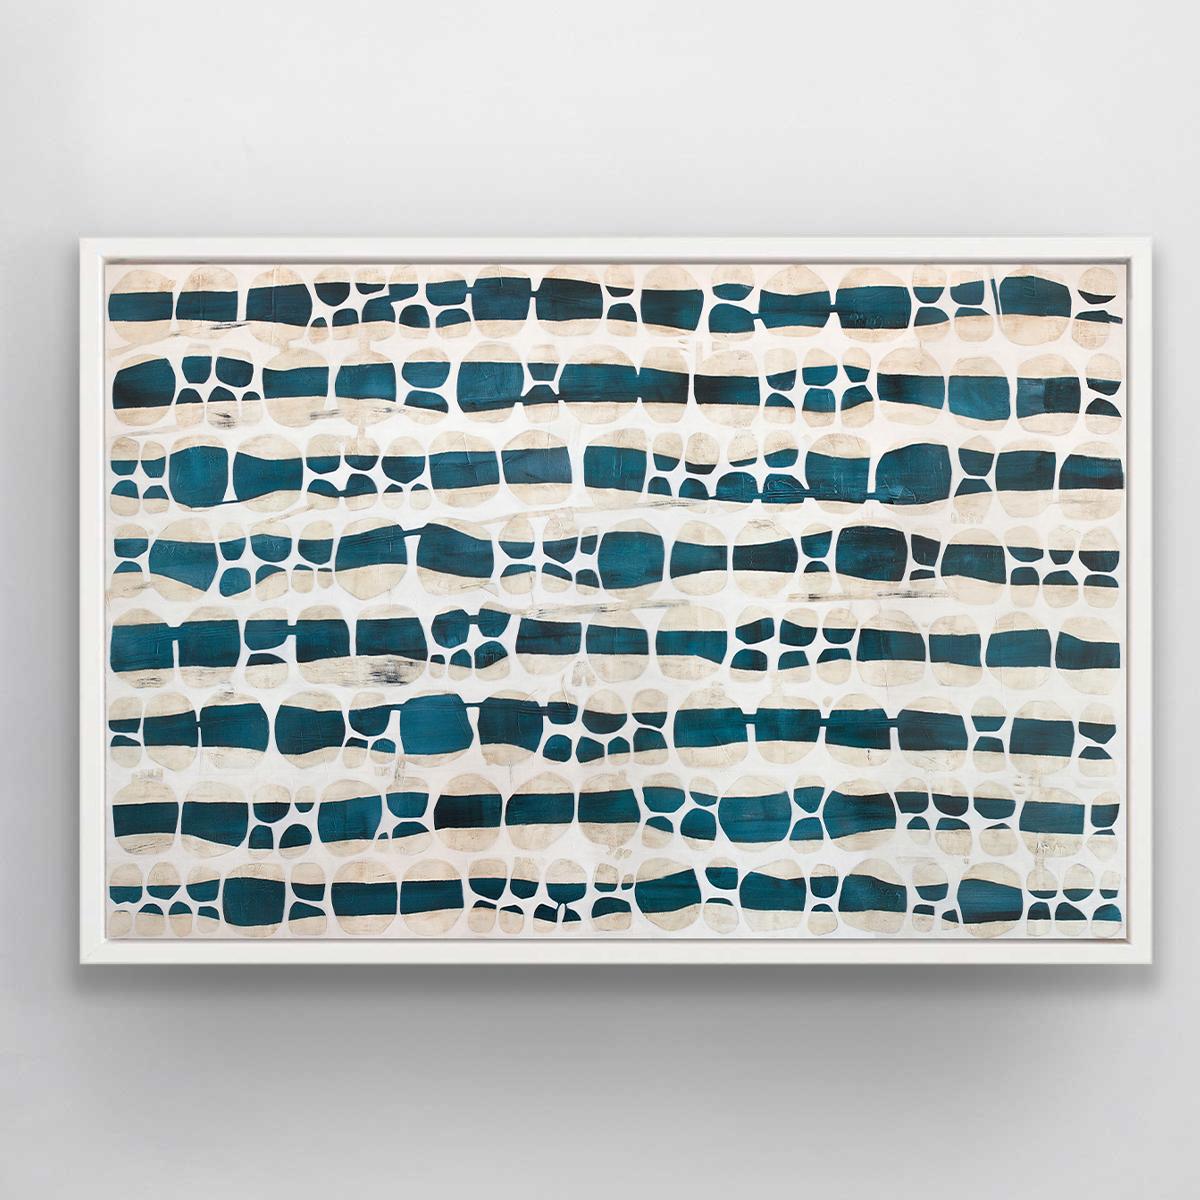 Sofie Swann Abstract Print - "Sand and Sea, " Limited Edition Giclee Print, 24" x 36"